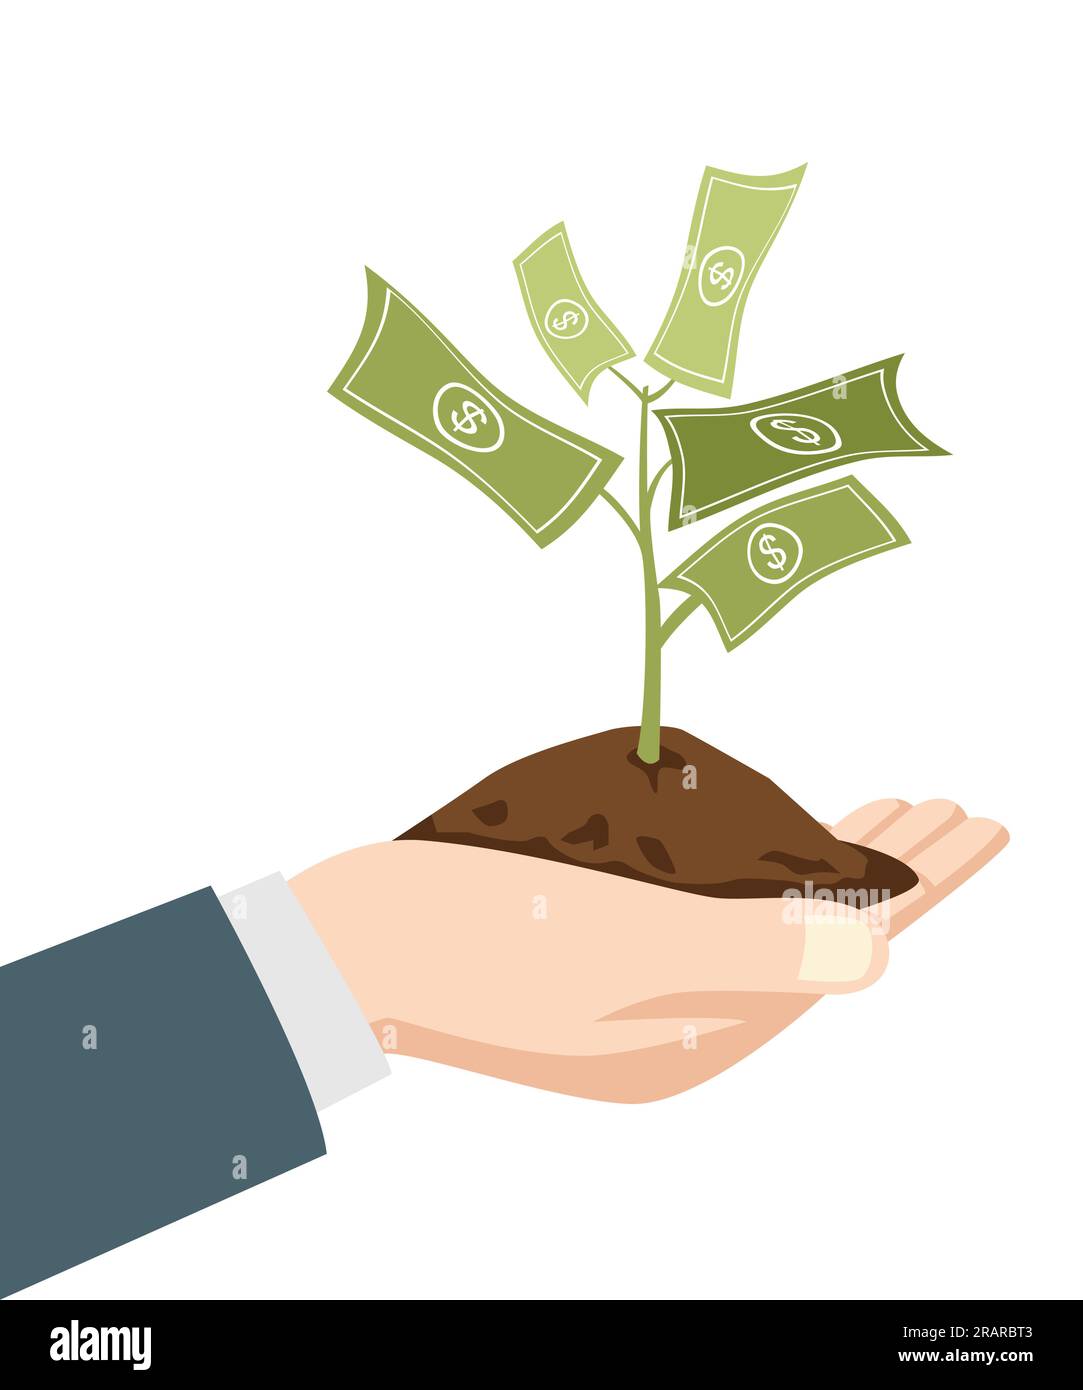 Illustration of a businessman hand holding a dirt with money tree, business, savings, investment concept Stock Vector